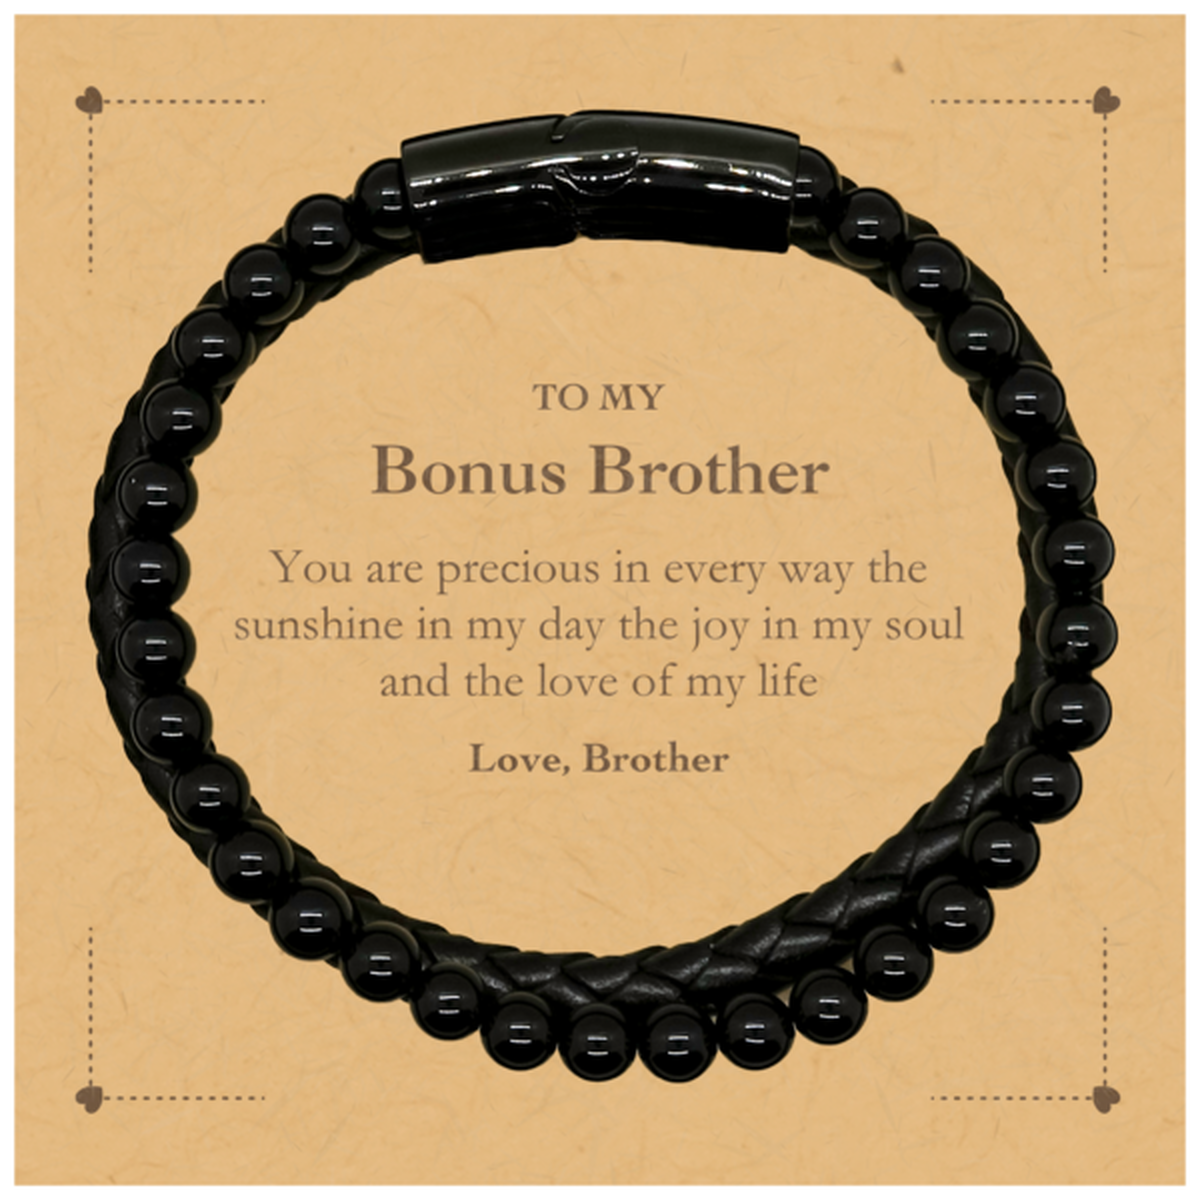 Graduation Gifts for Bonus Brother Stone Leather Bracelets Present from Brother, Christmas Bonus Brother Birthday Gifts Bonus Brother You are precious in every way the sunshine in my day. Love, Brother